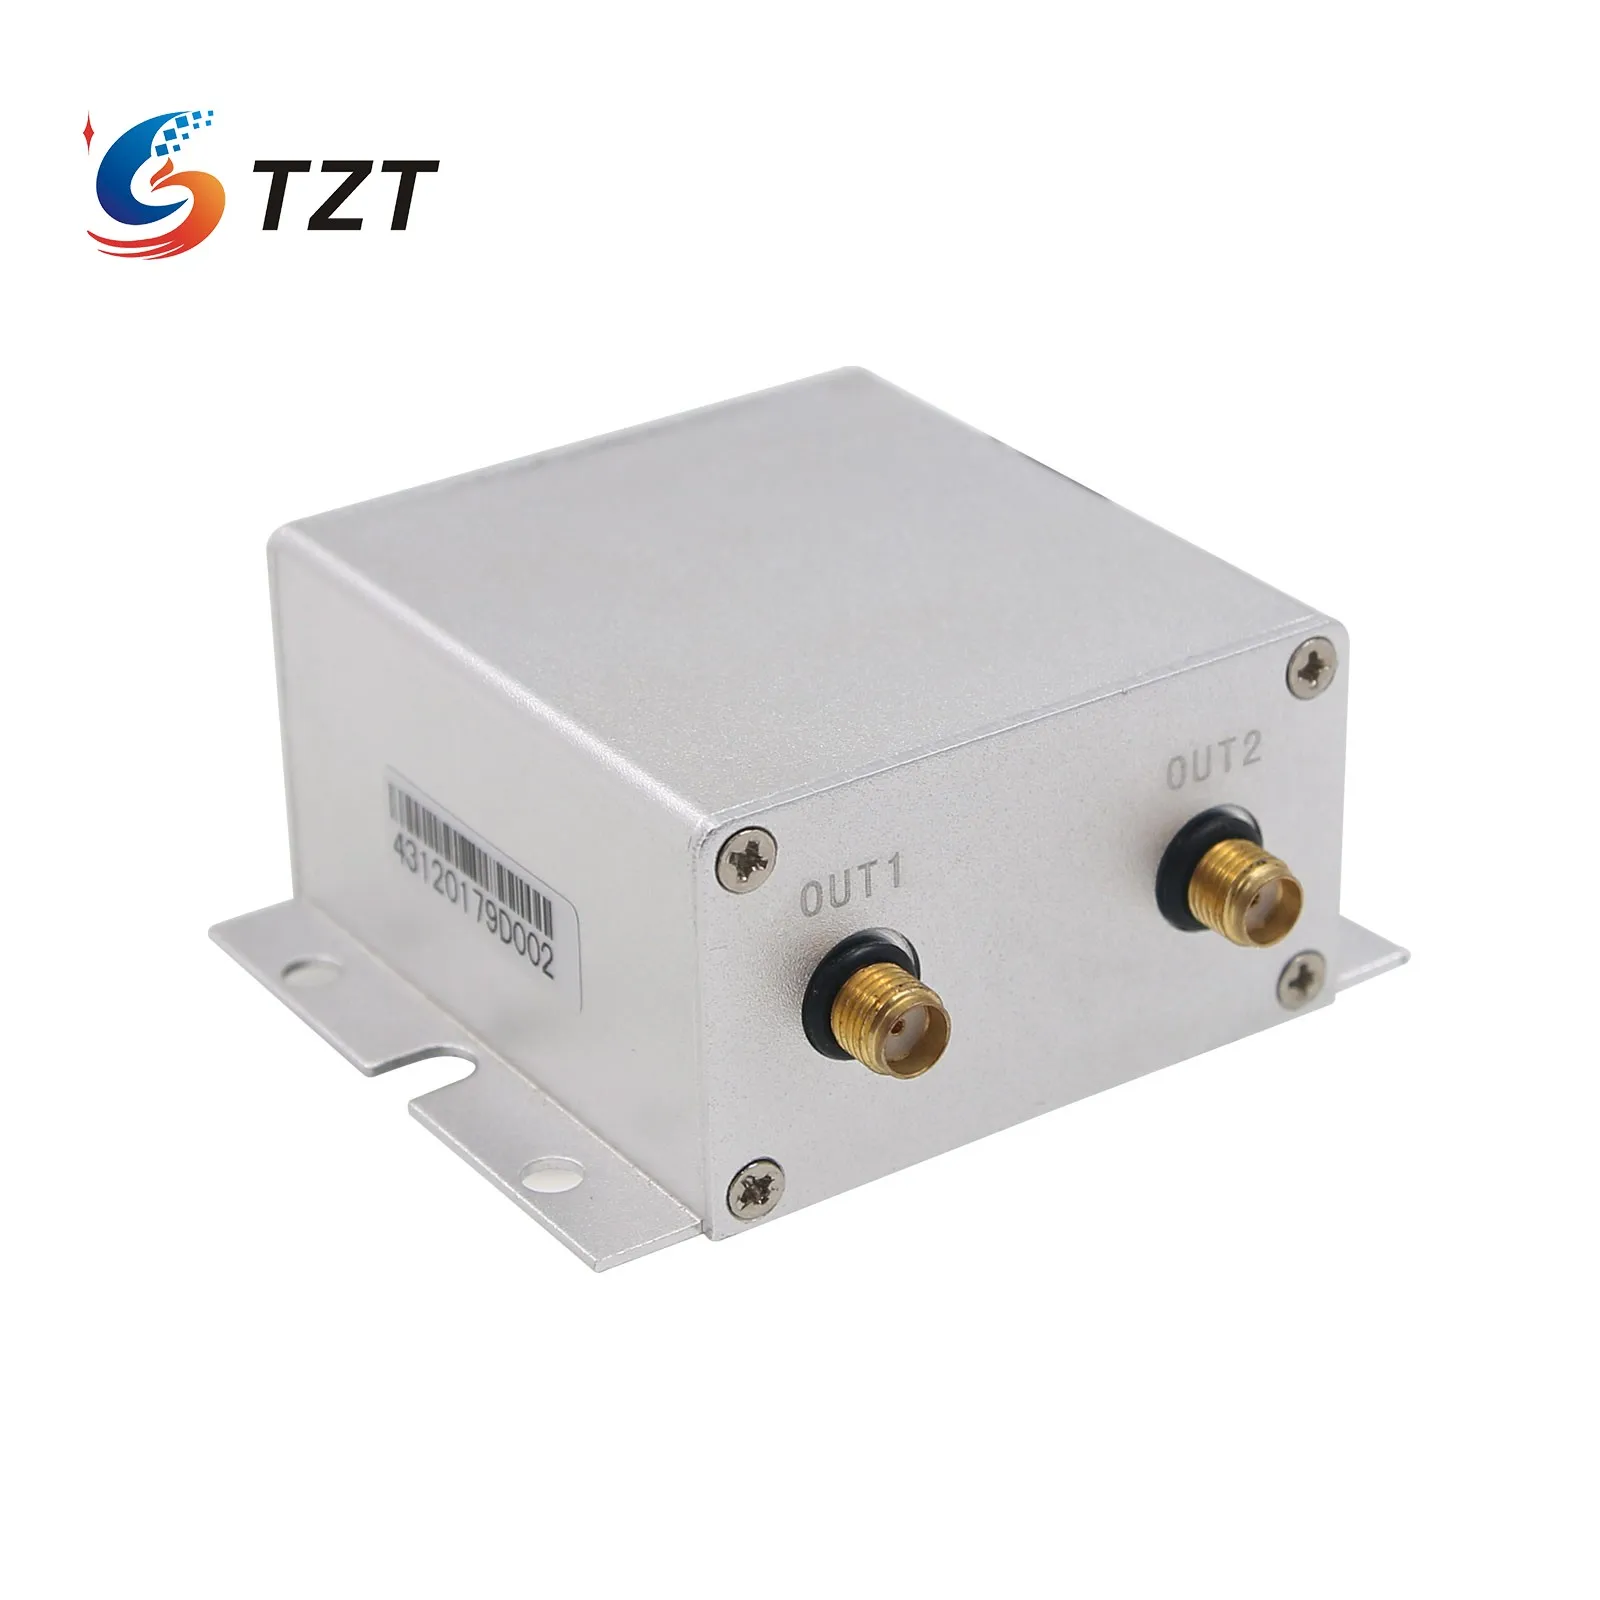 

TZT Constant Temperature Crystal OCXO 10Mhz 0.01PPM 2 Channel Output Compatible with USRP B210